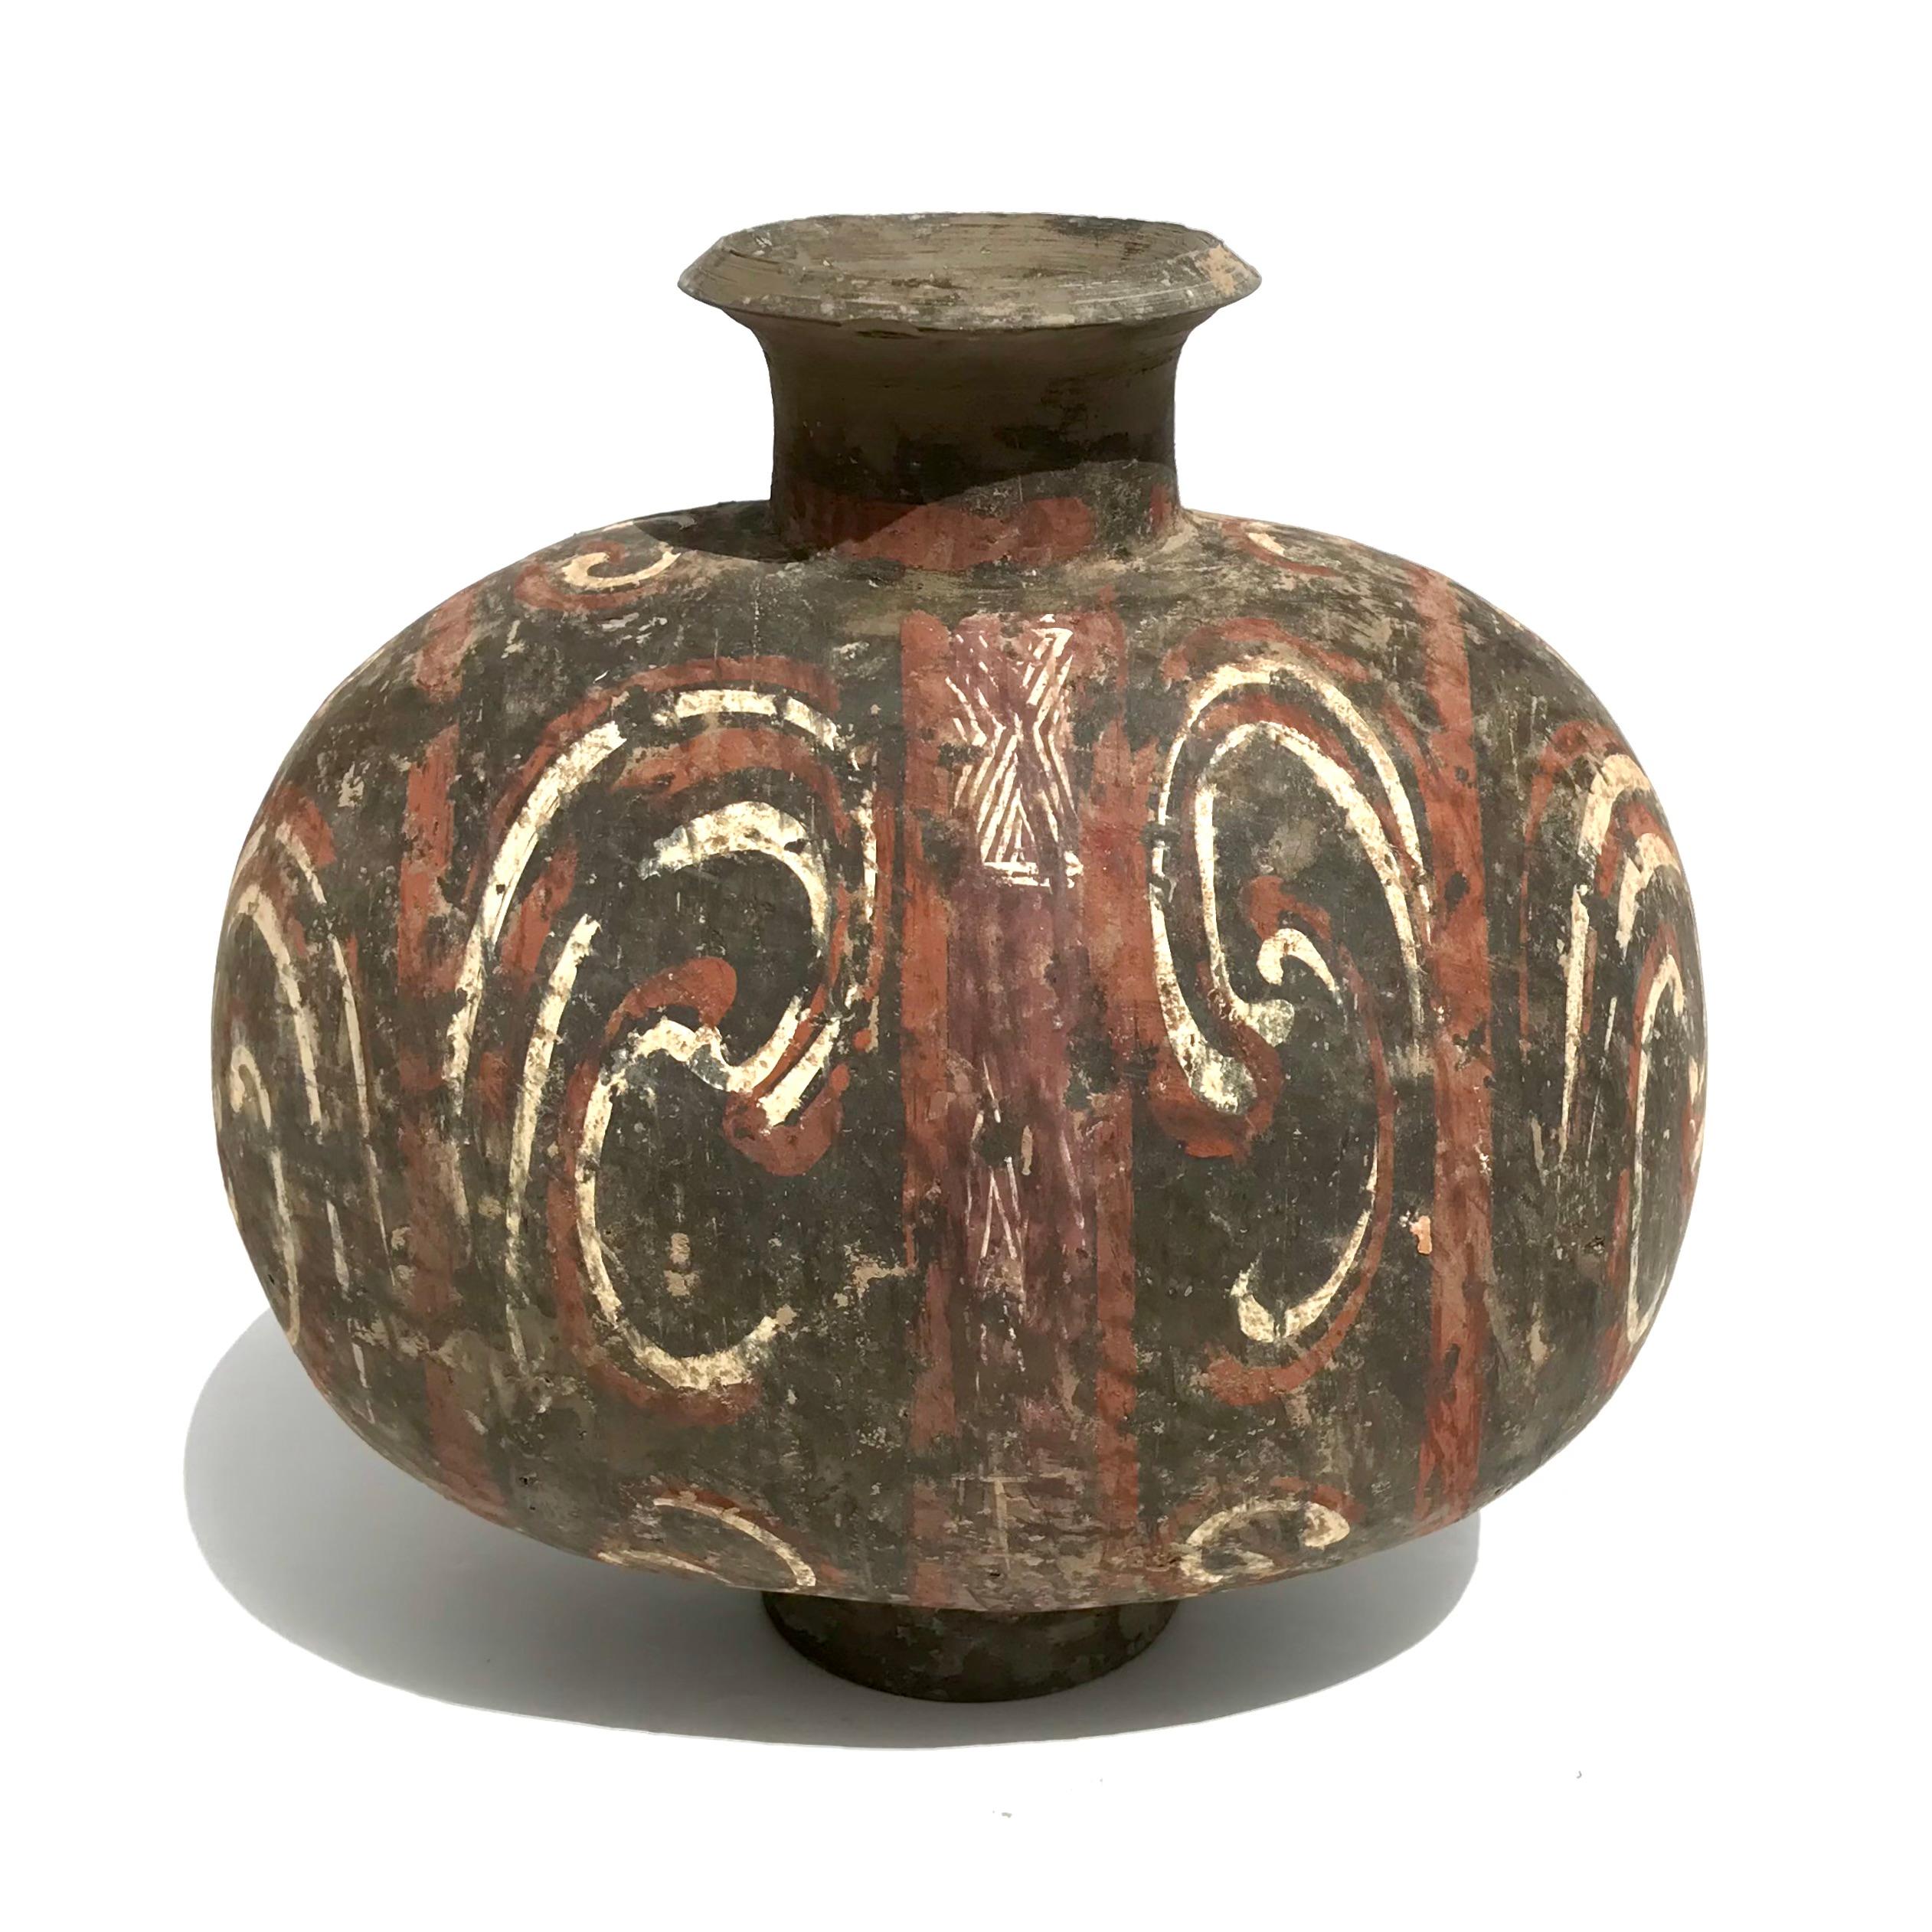 Chinese Han Dynasty earthenware cocoon jar

Cocoon jars or Cocoon-shaped jars are funerary pottery vessels in China, belonging to the period of the 1st millennium BCE. The shape is similar to the Cypriot Barrel-shaped jugs, as is generally the